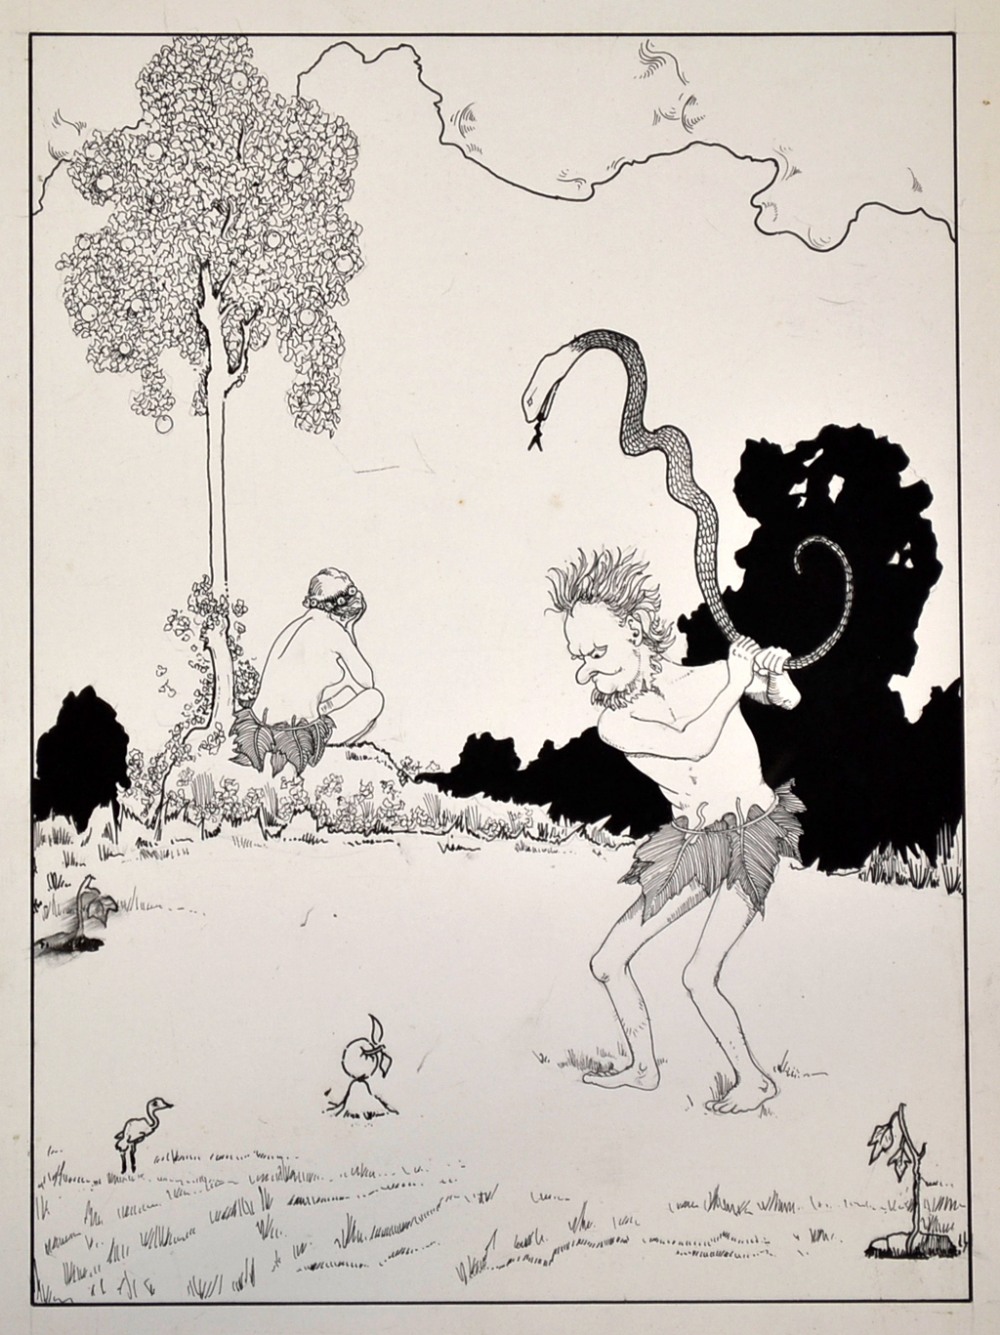 Beardsley, Aubrey (after/in the style of) ADAM AND EVE GOLFING SCENE - original ink drawing on